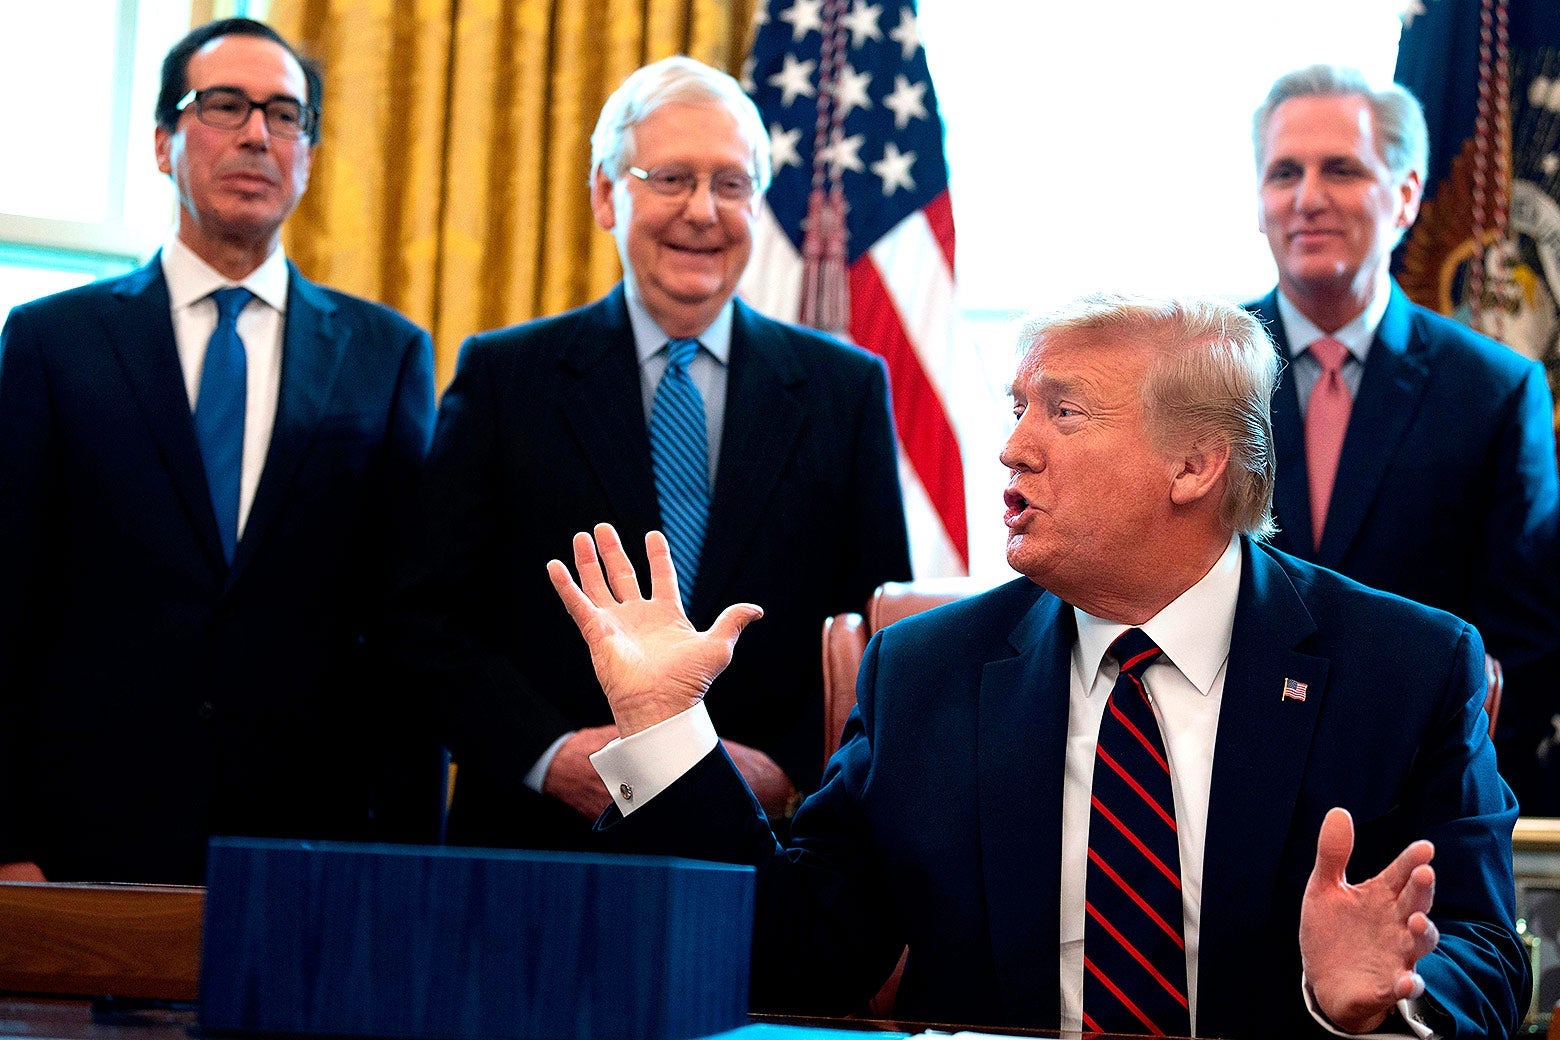 Donald Trump raises he hands while speaking to Steve Mnuchin, Mitch McConnell, and Kevin McCarthy.